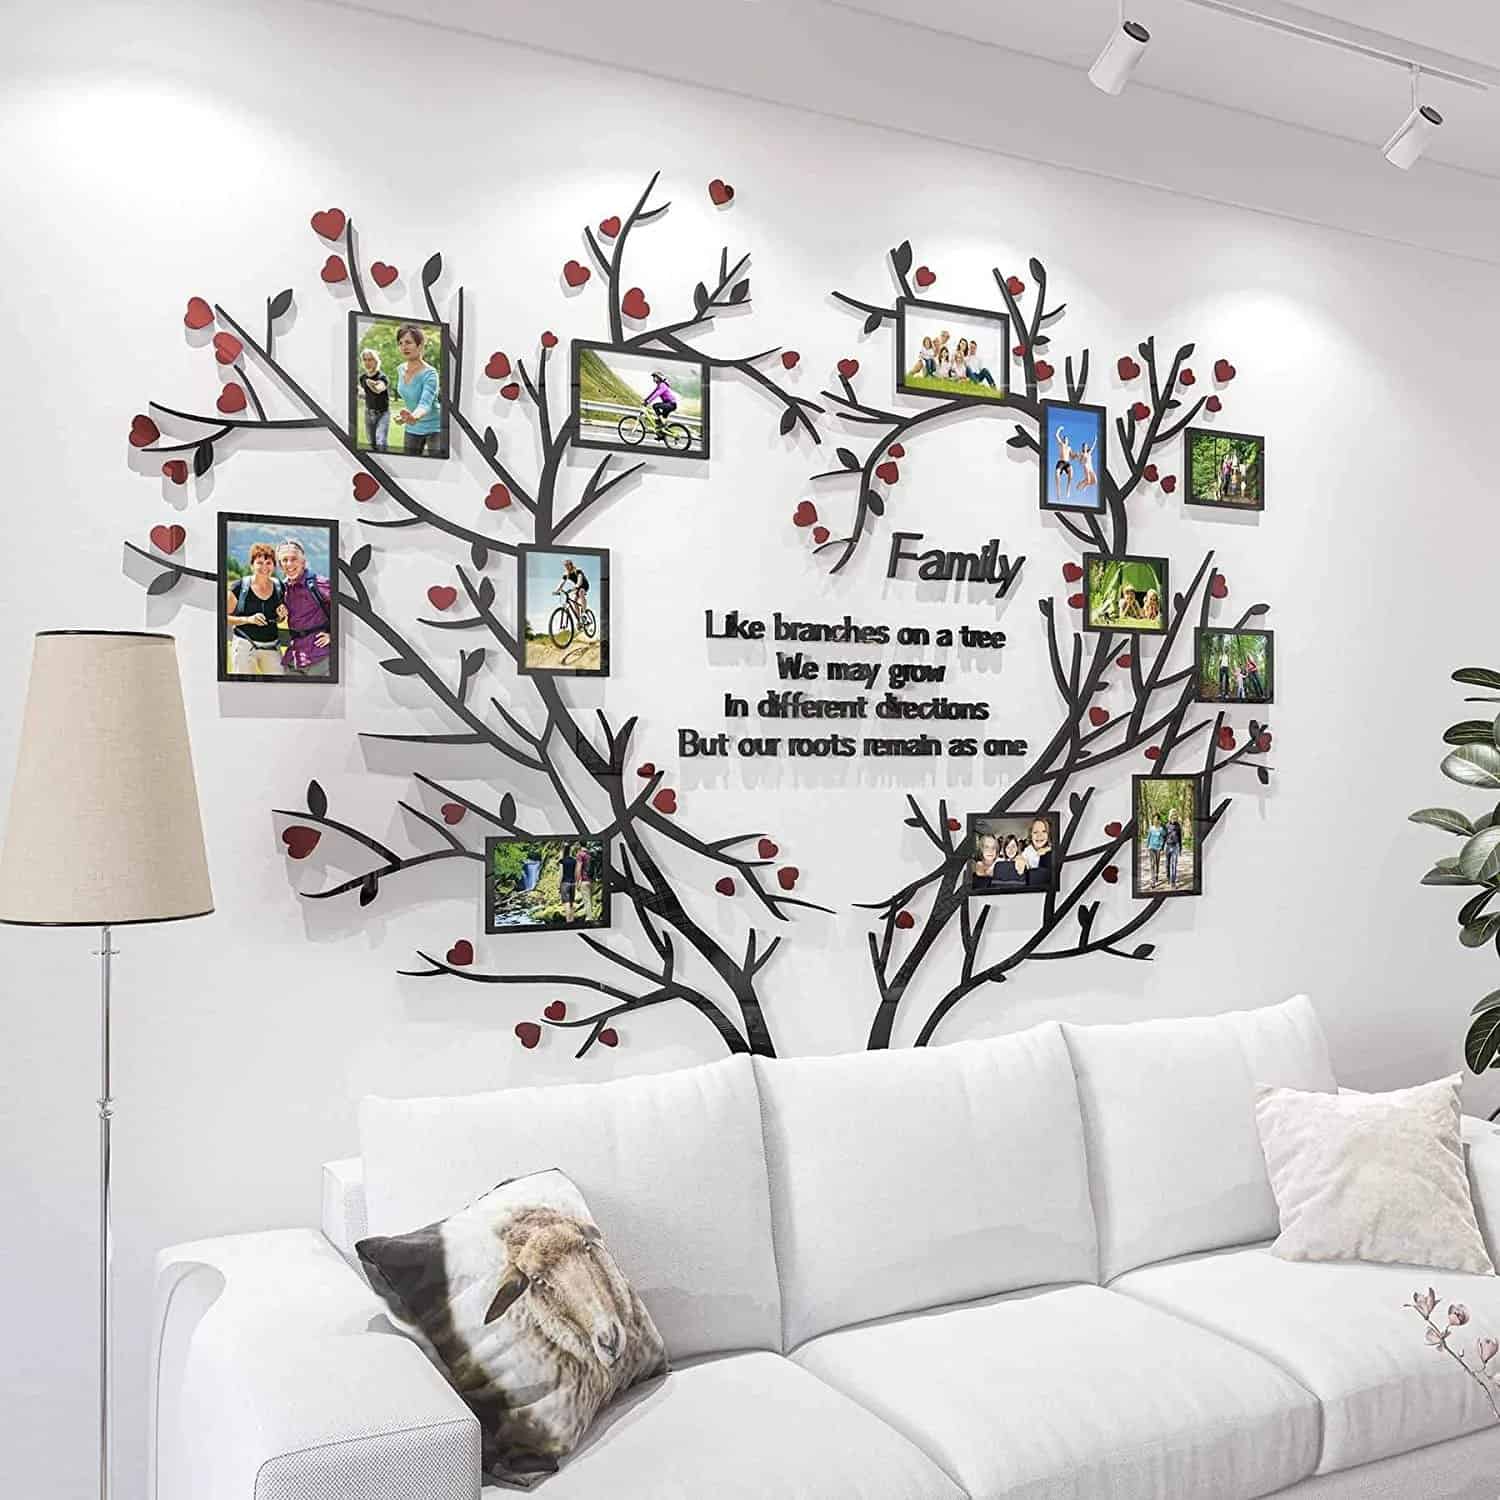 Show Off Your Family Photos With A Family Tree Decal